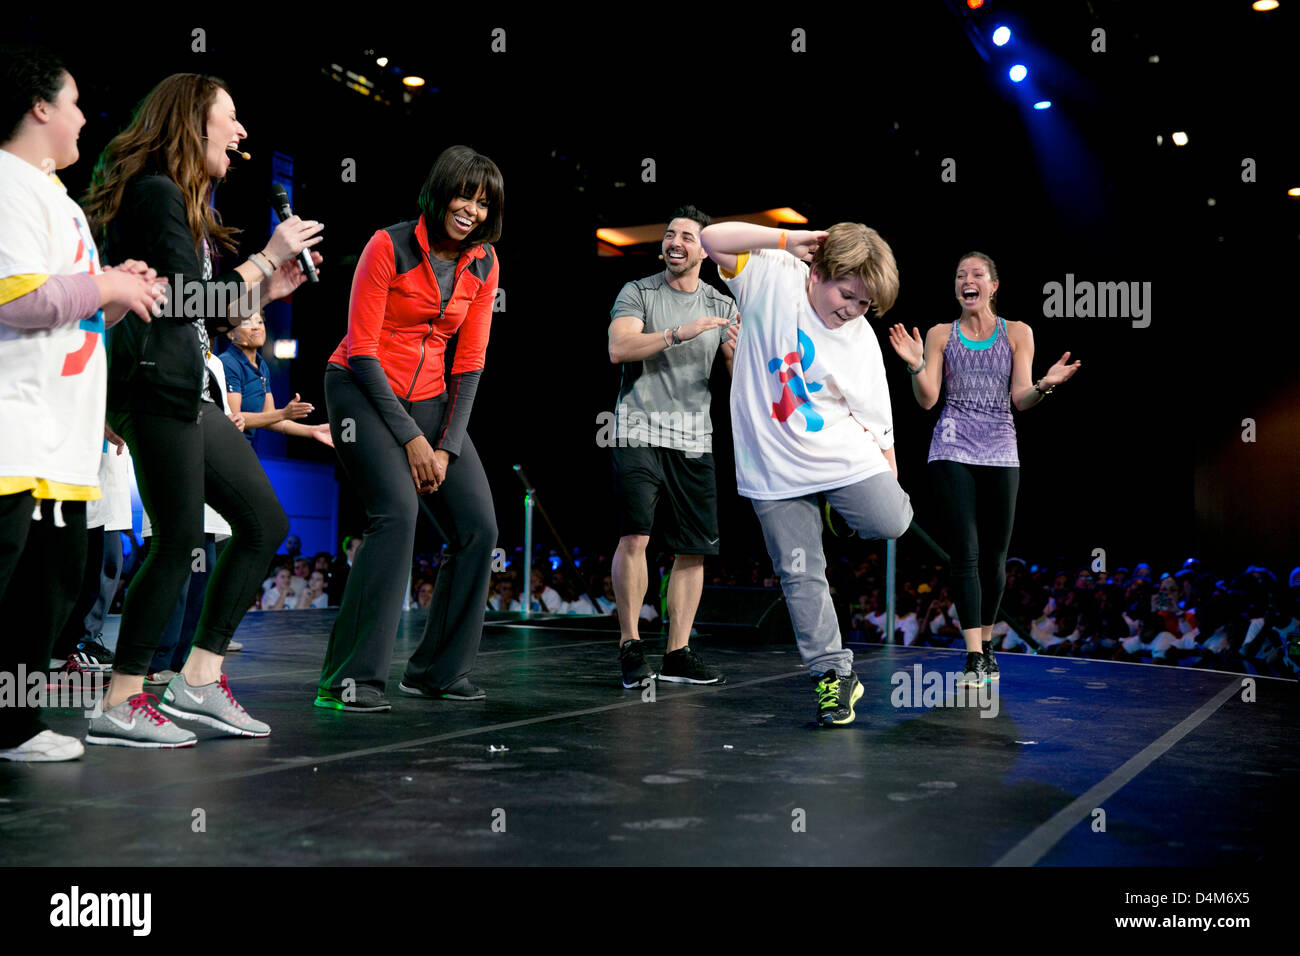 US First Lady Michelle Obama participates in a Let's Move! Active Schools event with athletes and students at McCormick Place February 28, 2013 in Chicago, IL. Stock Photo